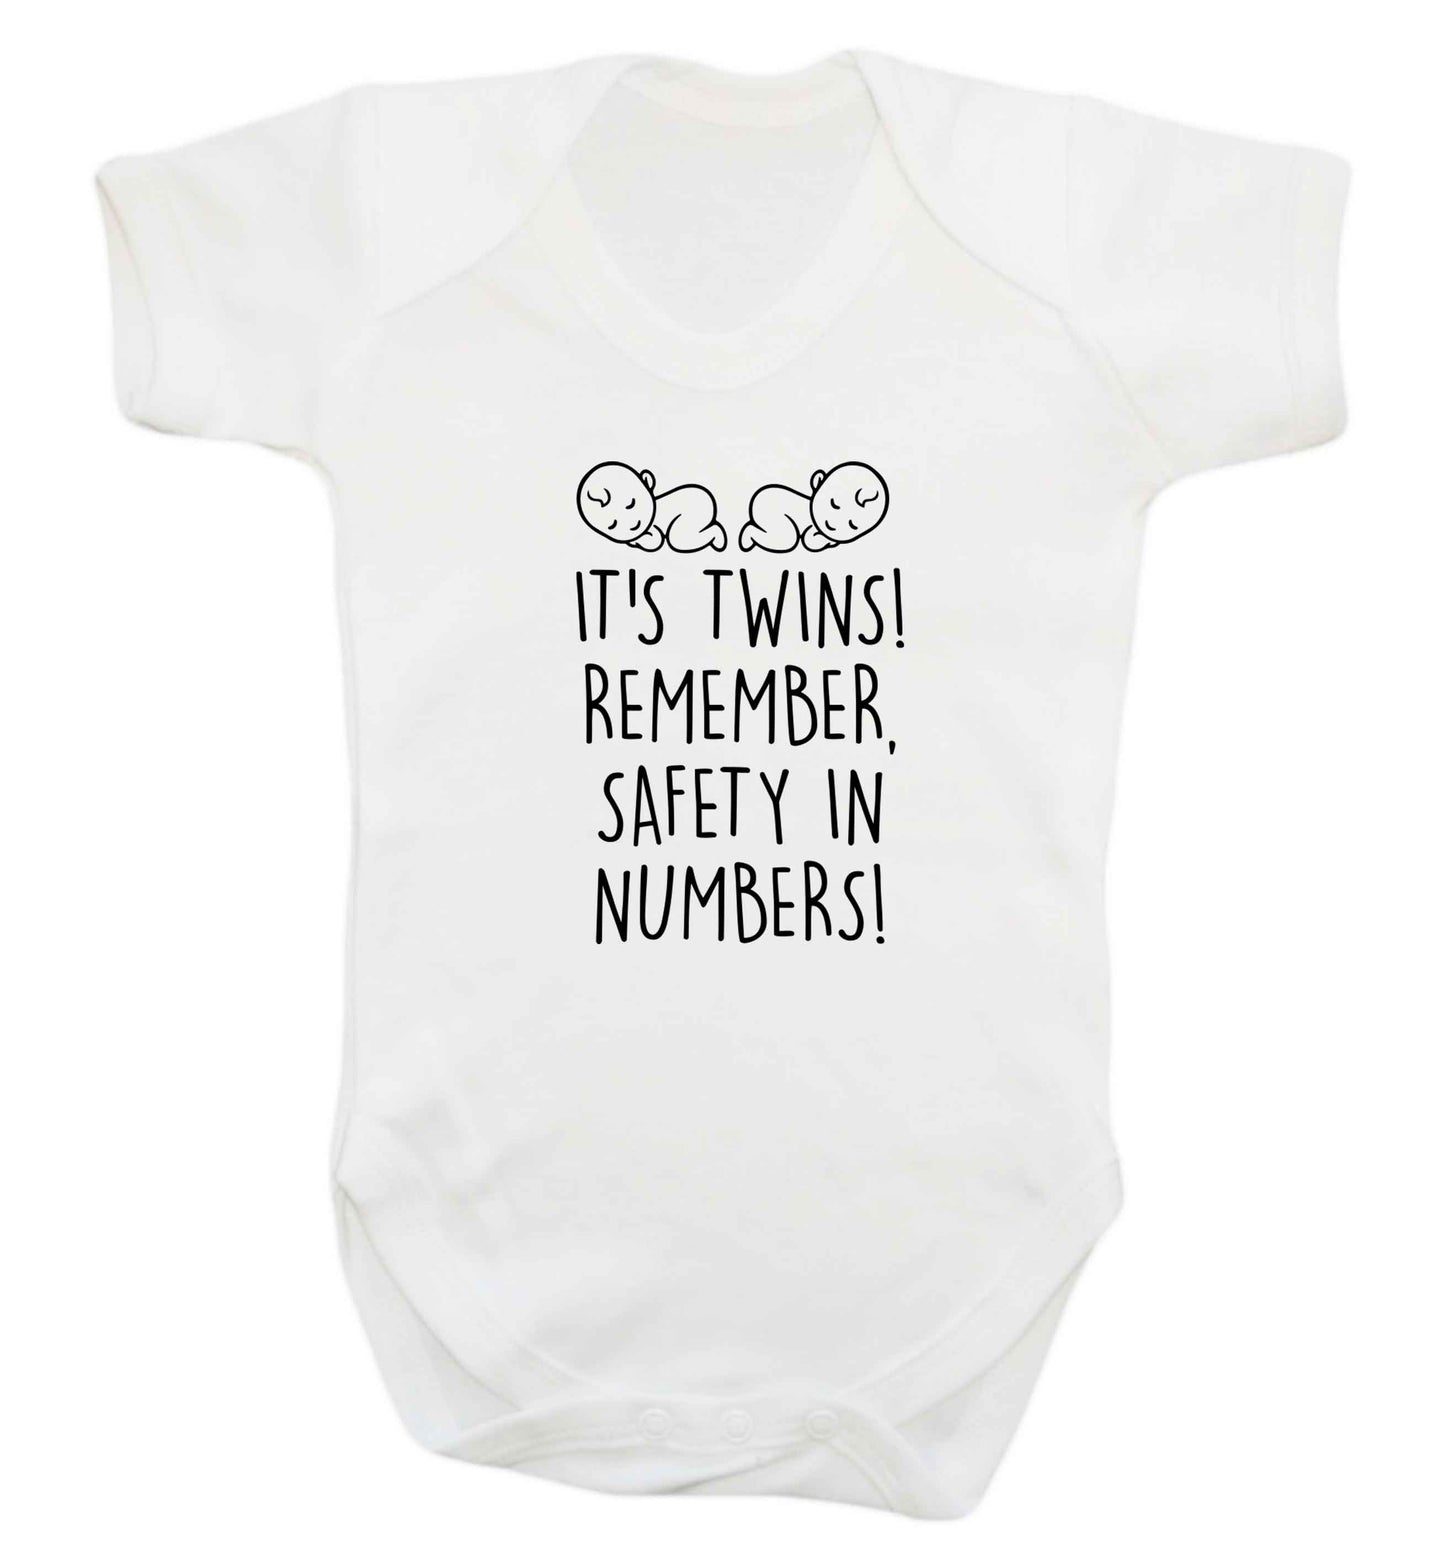 It's twins! Remember safety in numbers! baby vest white 18-24 months